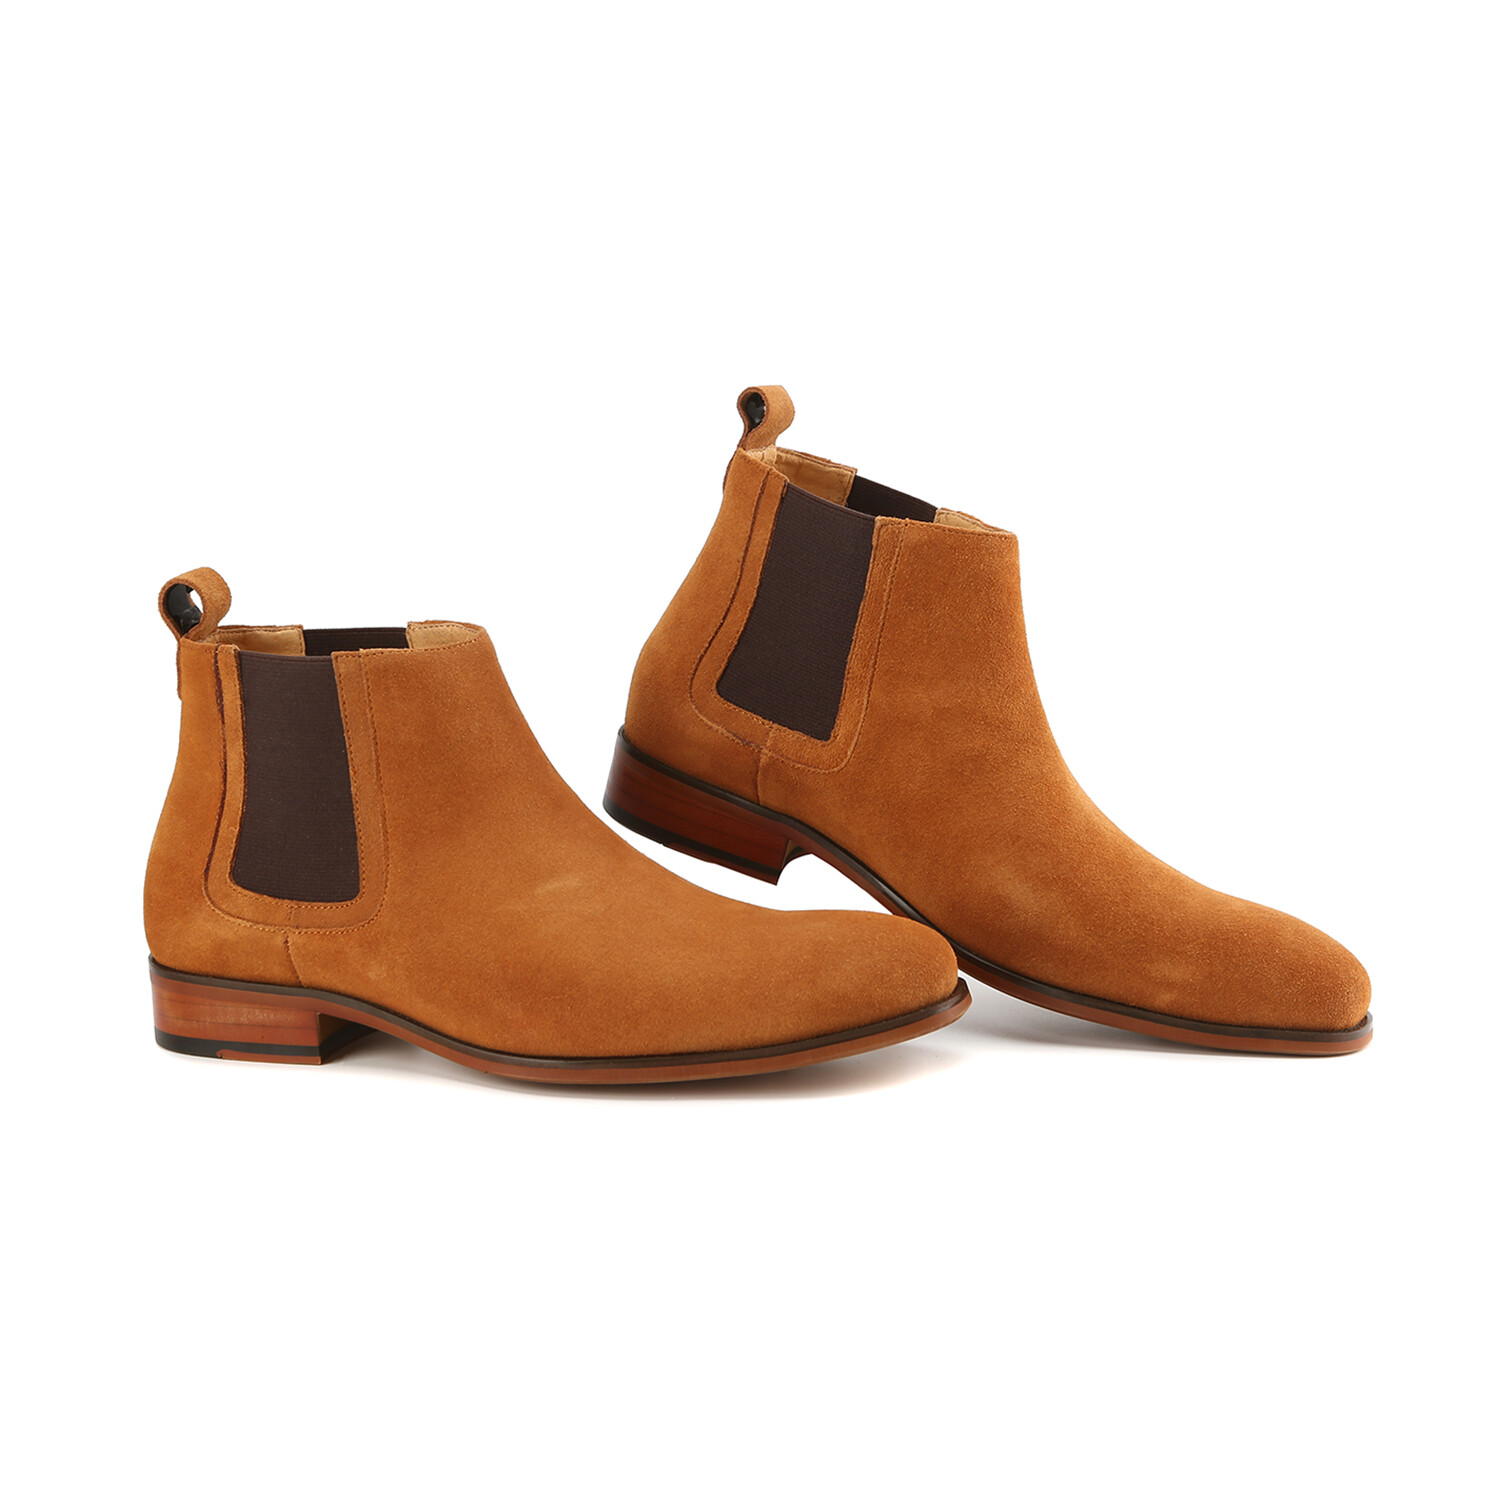 Pull-On Chelsea Gore Dress Boot // Honey Suede (Size 8) - Gino Vitale ...